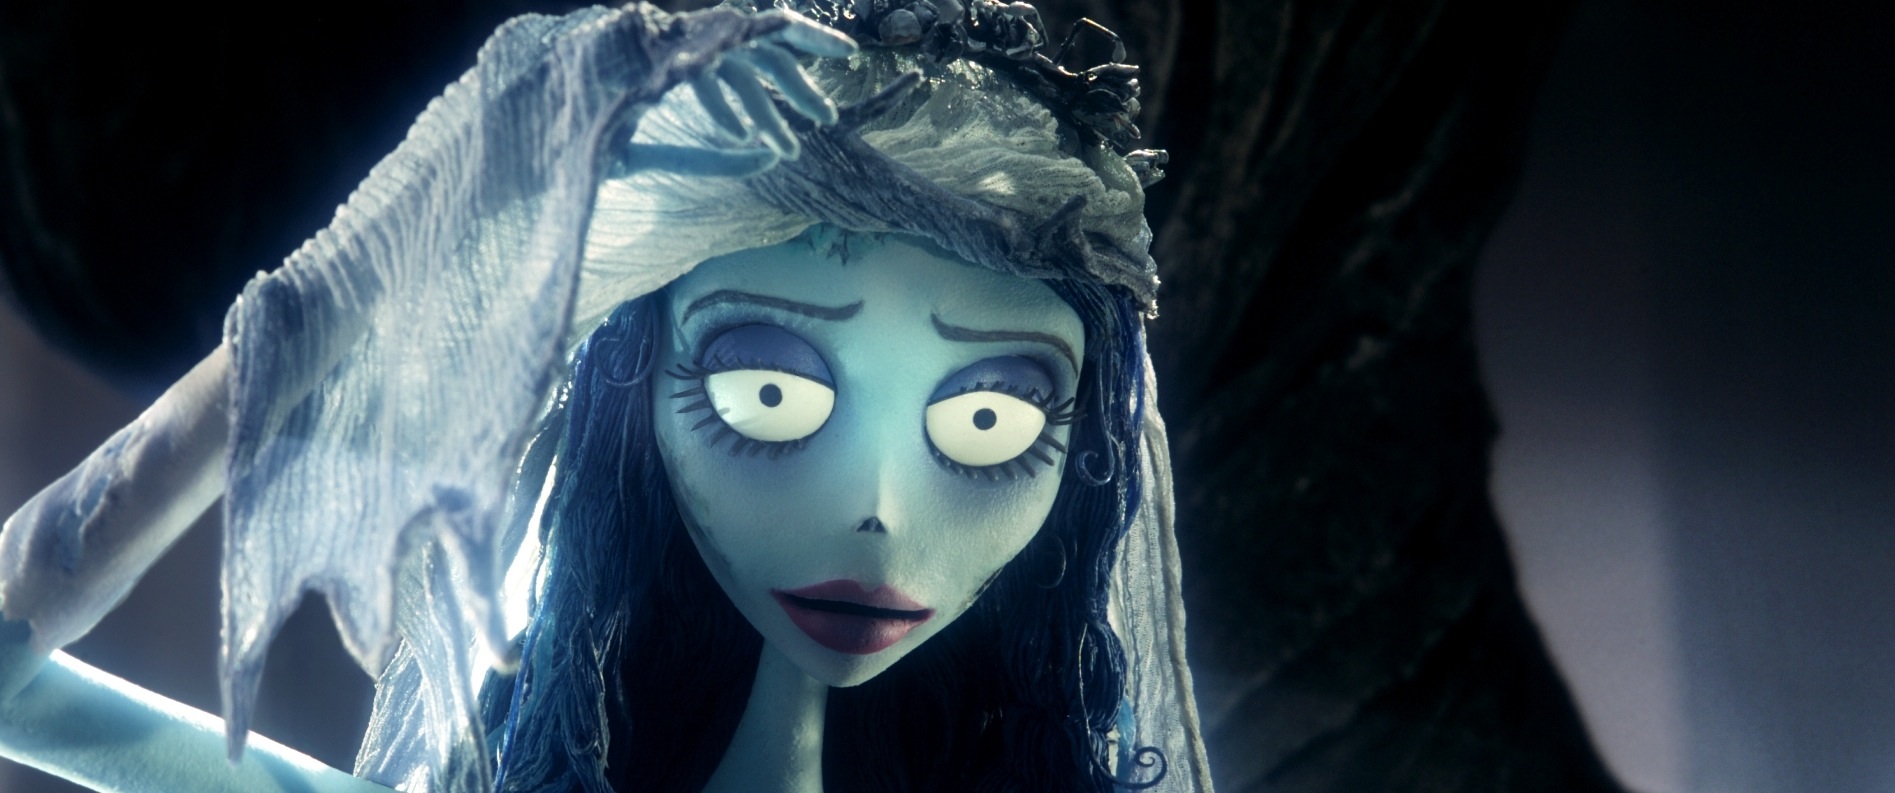 Tim Burton’s Corpse Bride Blu-ray Steelbook is live in the UK from Entertainment Store